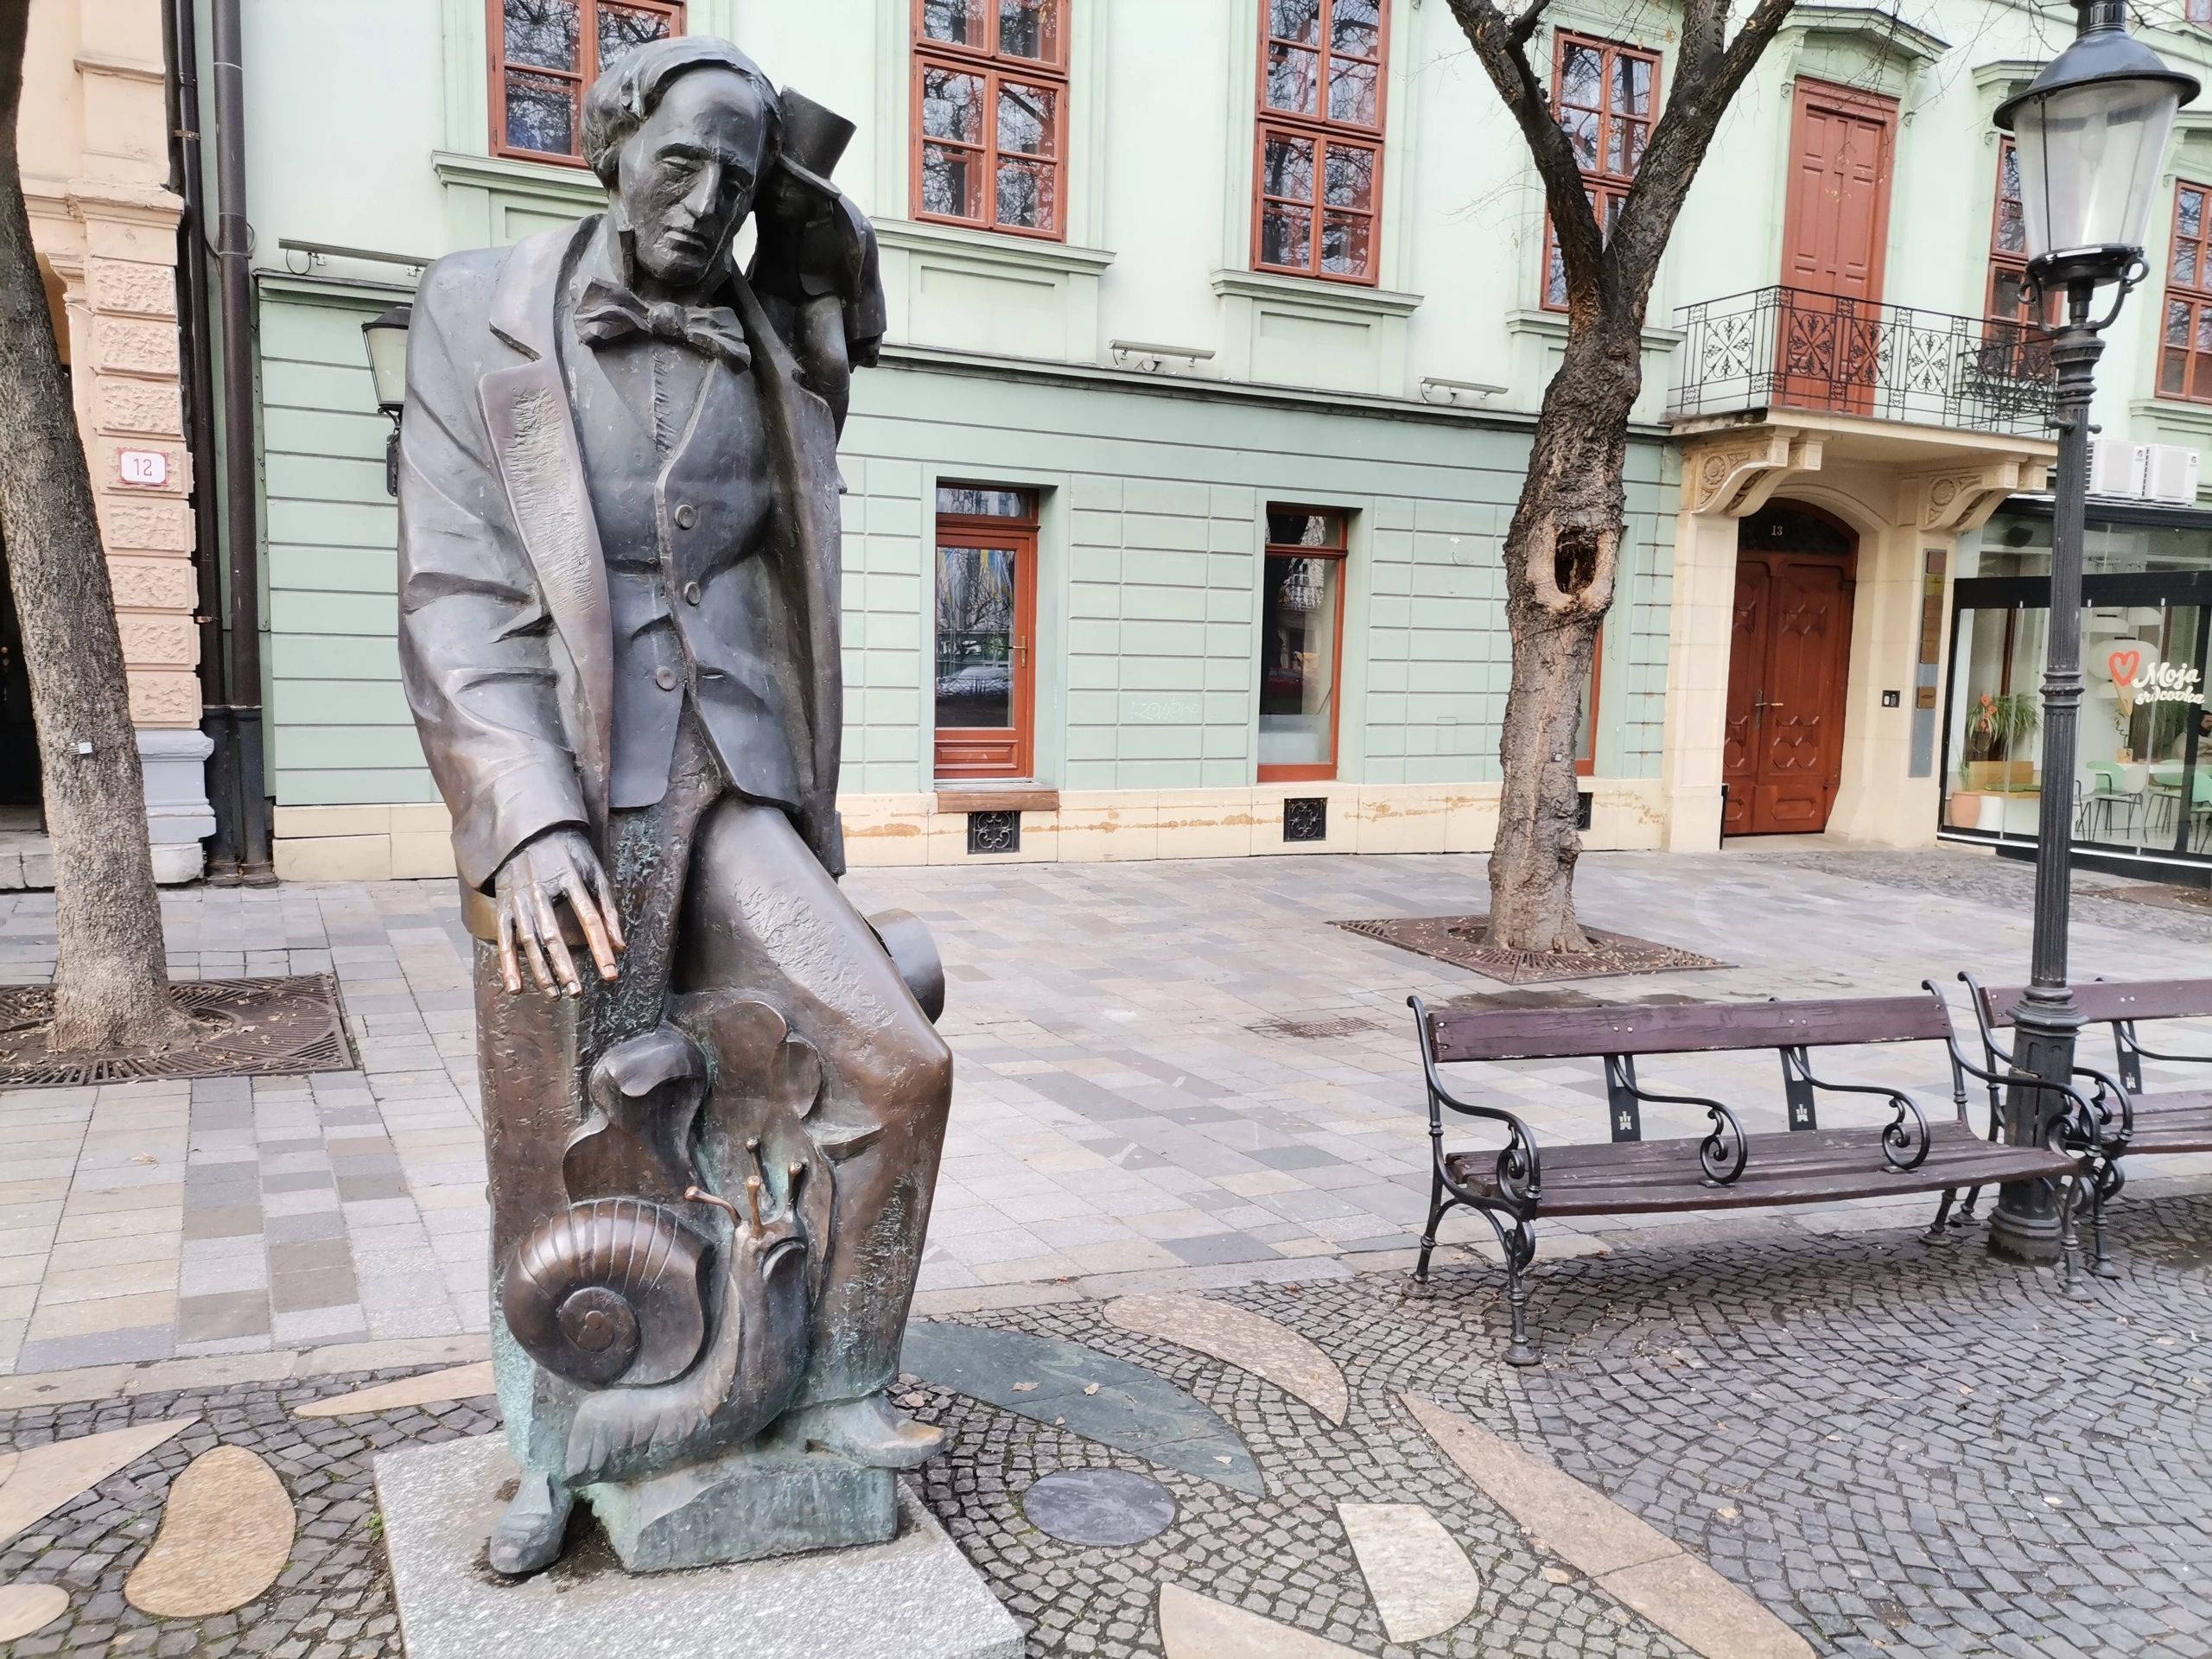 The Statue of H.C. Andersen at the City Square